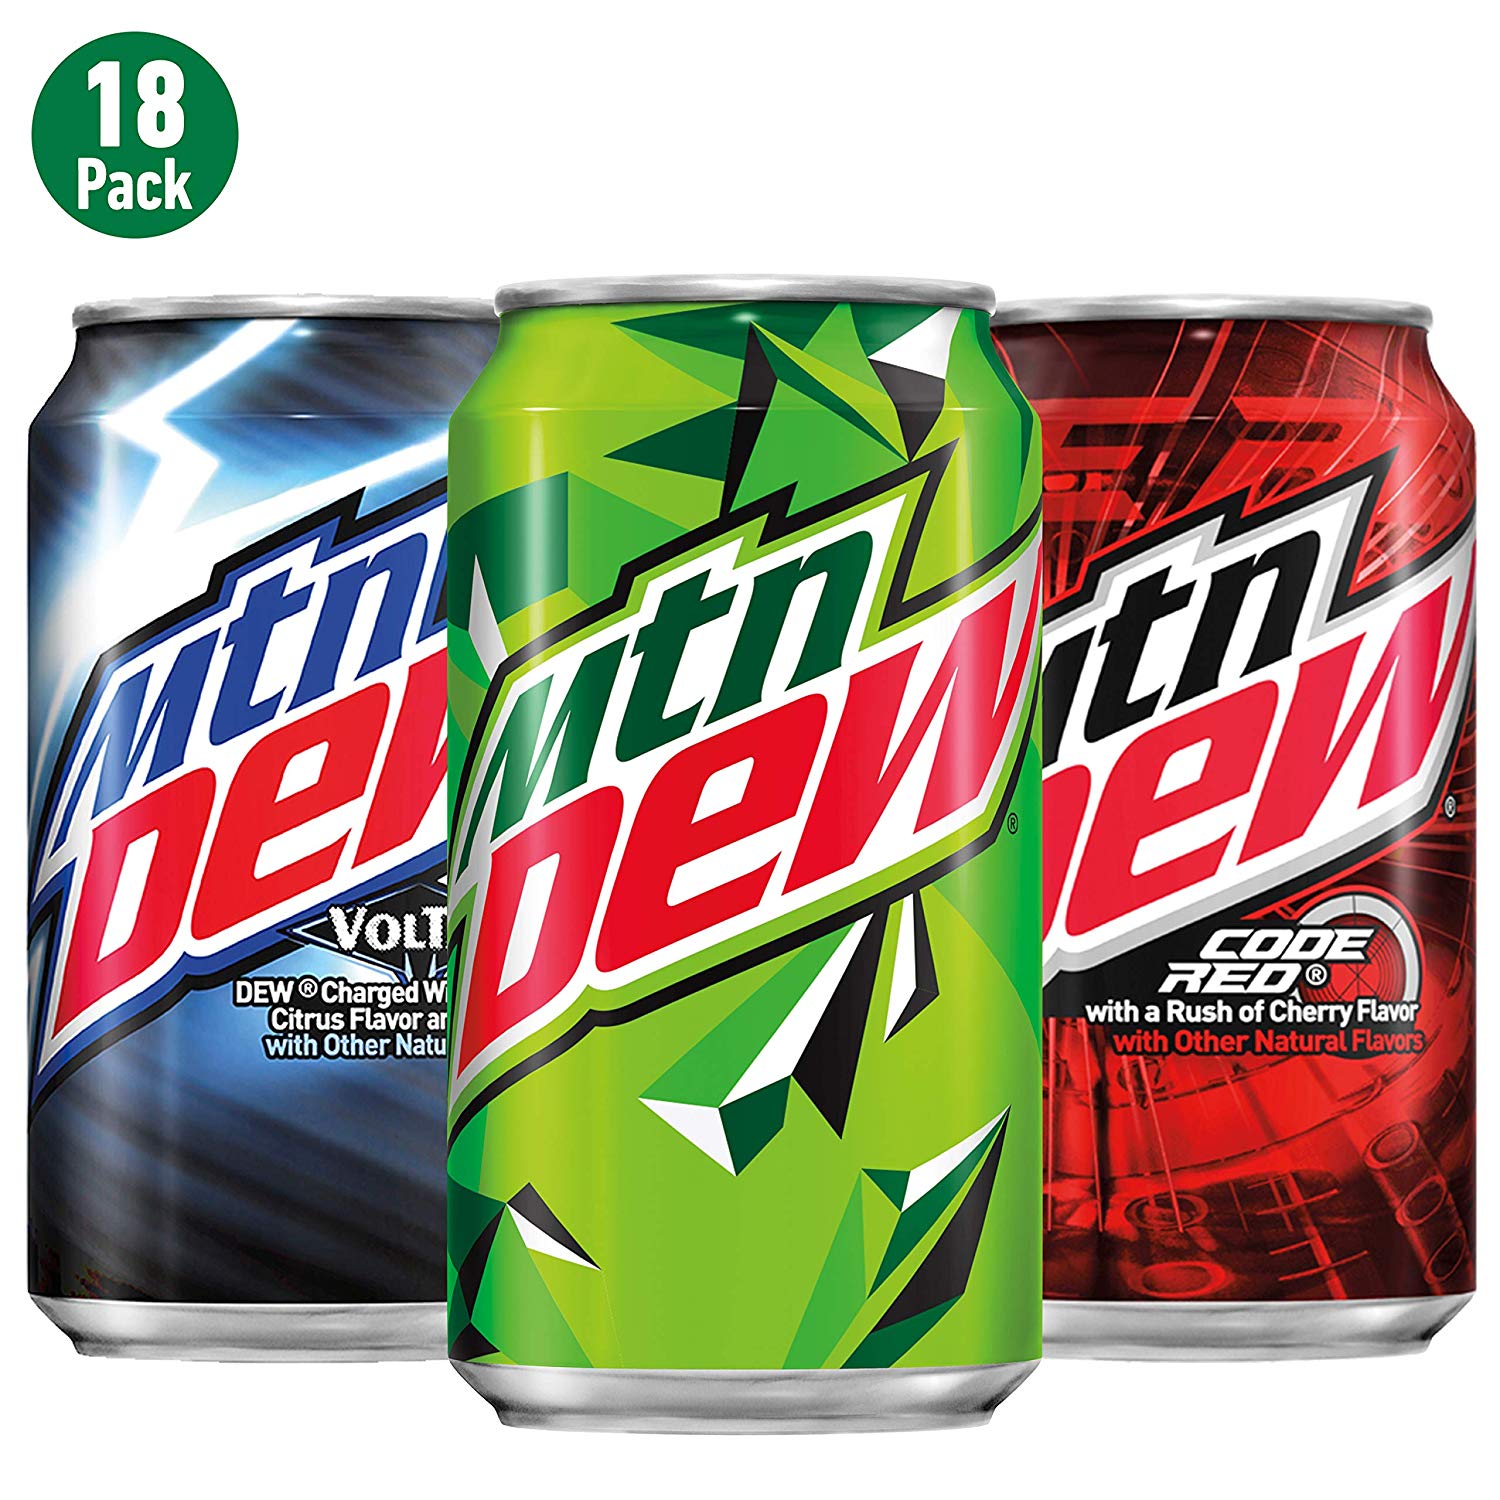 Soda Variety Pack with Mountain Dew, Dew Code Red, and Dew Voltage, 12 Fl Oz Cans, Pack of 18 (Packaging May Vary)